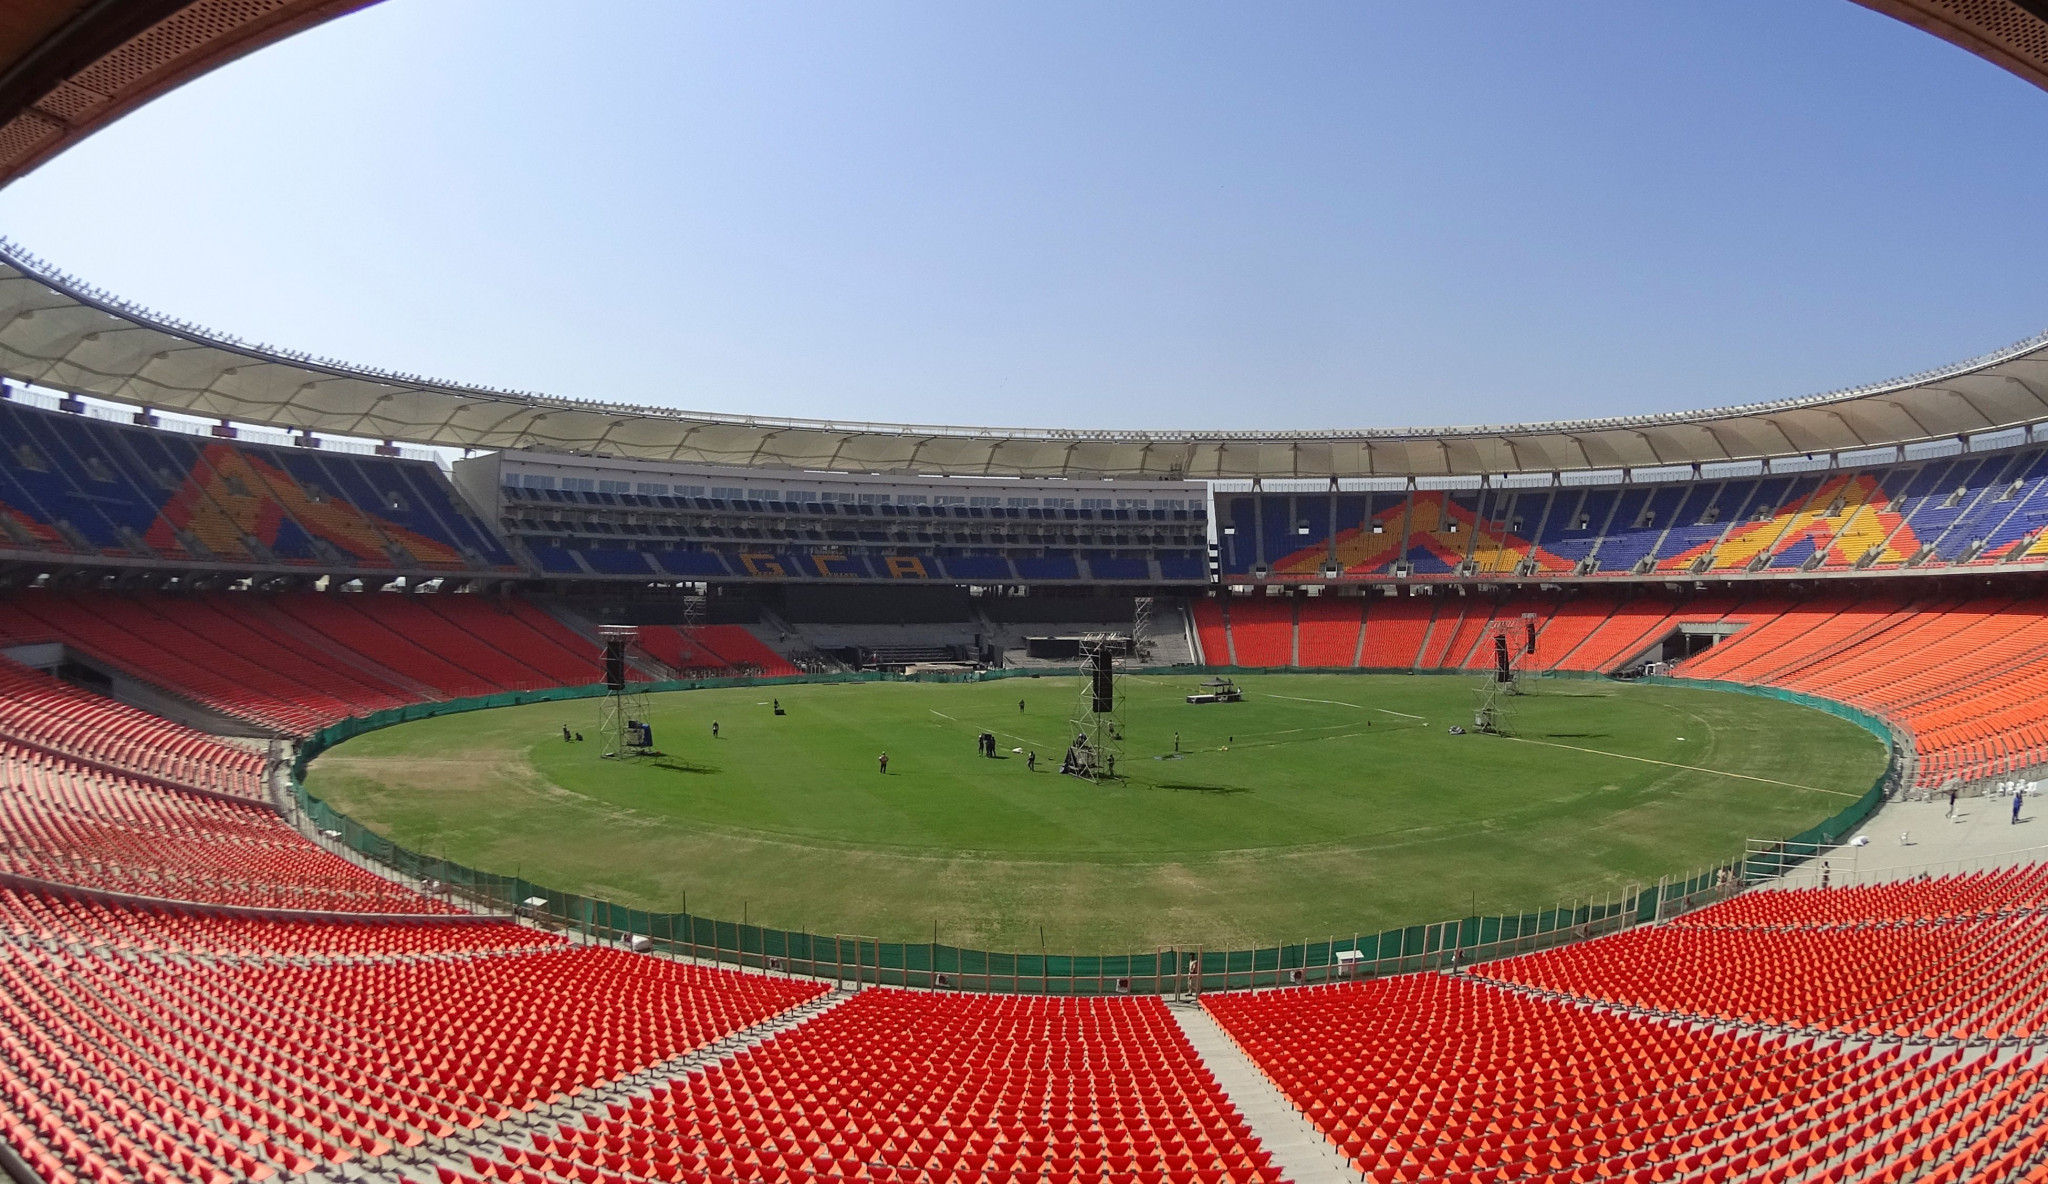 The Motera Stadium in Ahmedabad has been cited as a potential Opening Ceremony host for the 2036 Olympic Games ©Getty Images